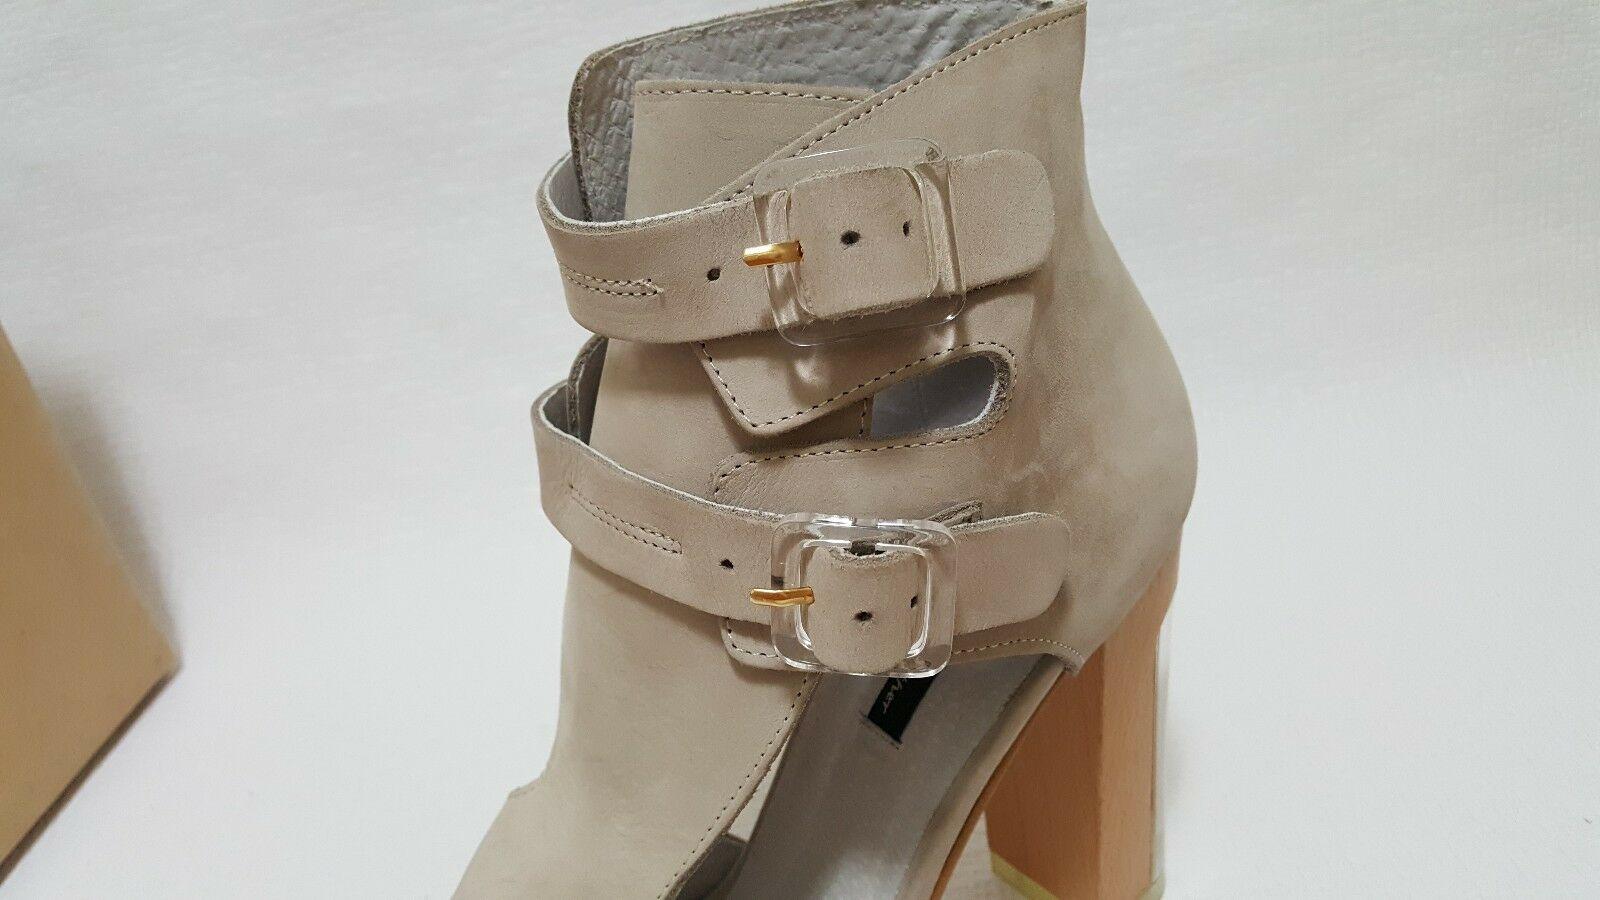 Women's Miista Sandals Shoes Ankle Boots Clear Heels Strapping Size  US 10  EU 41 - SVNYFancy